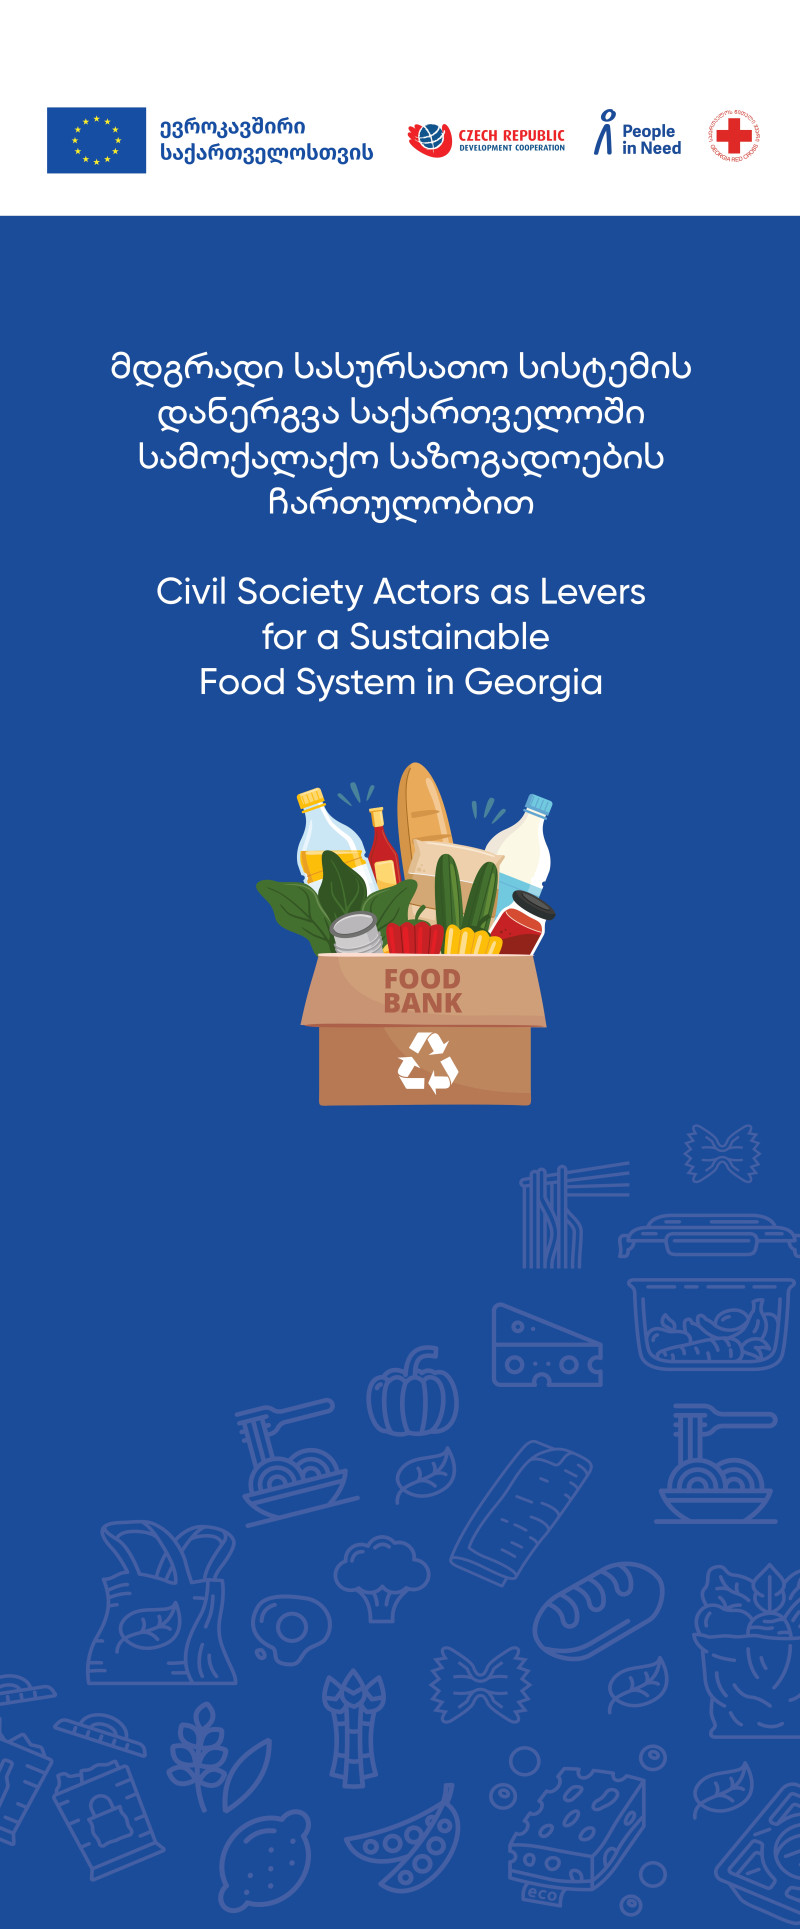 Civil Society Actors as Levers for a Sustainable Food System in Georgia